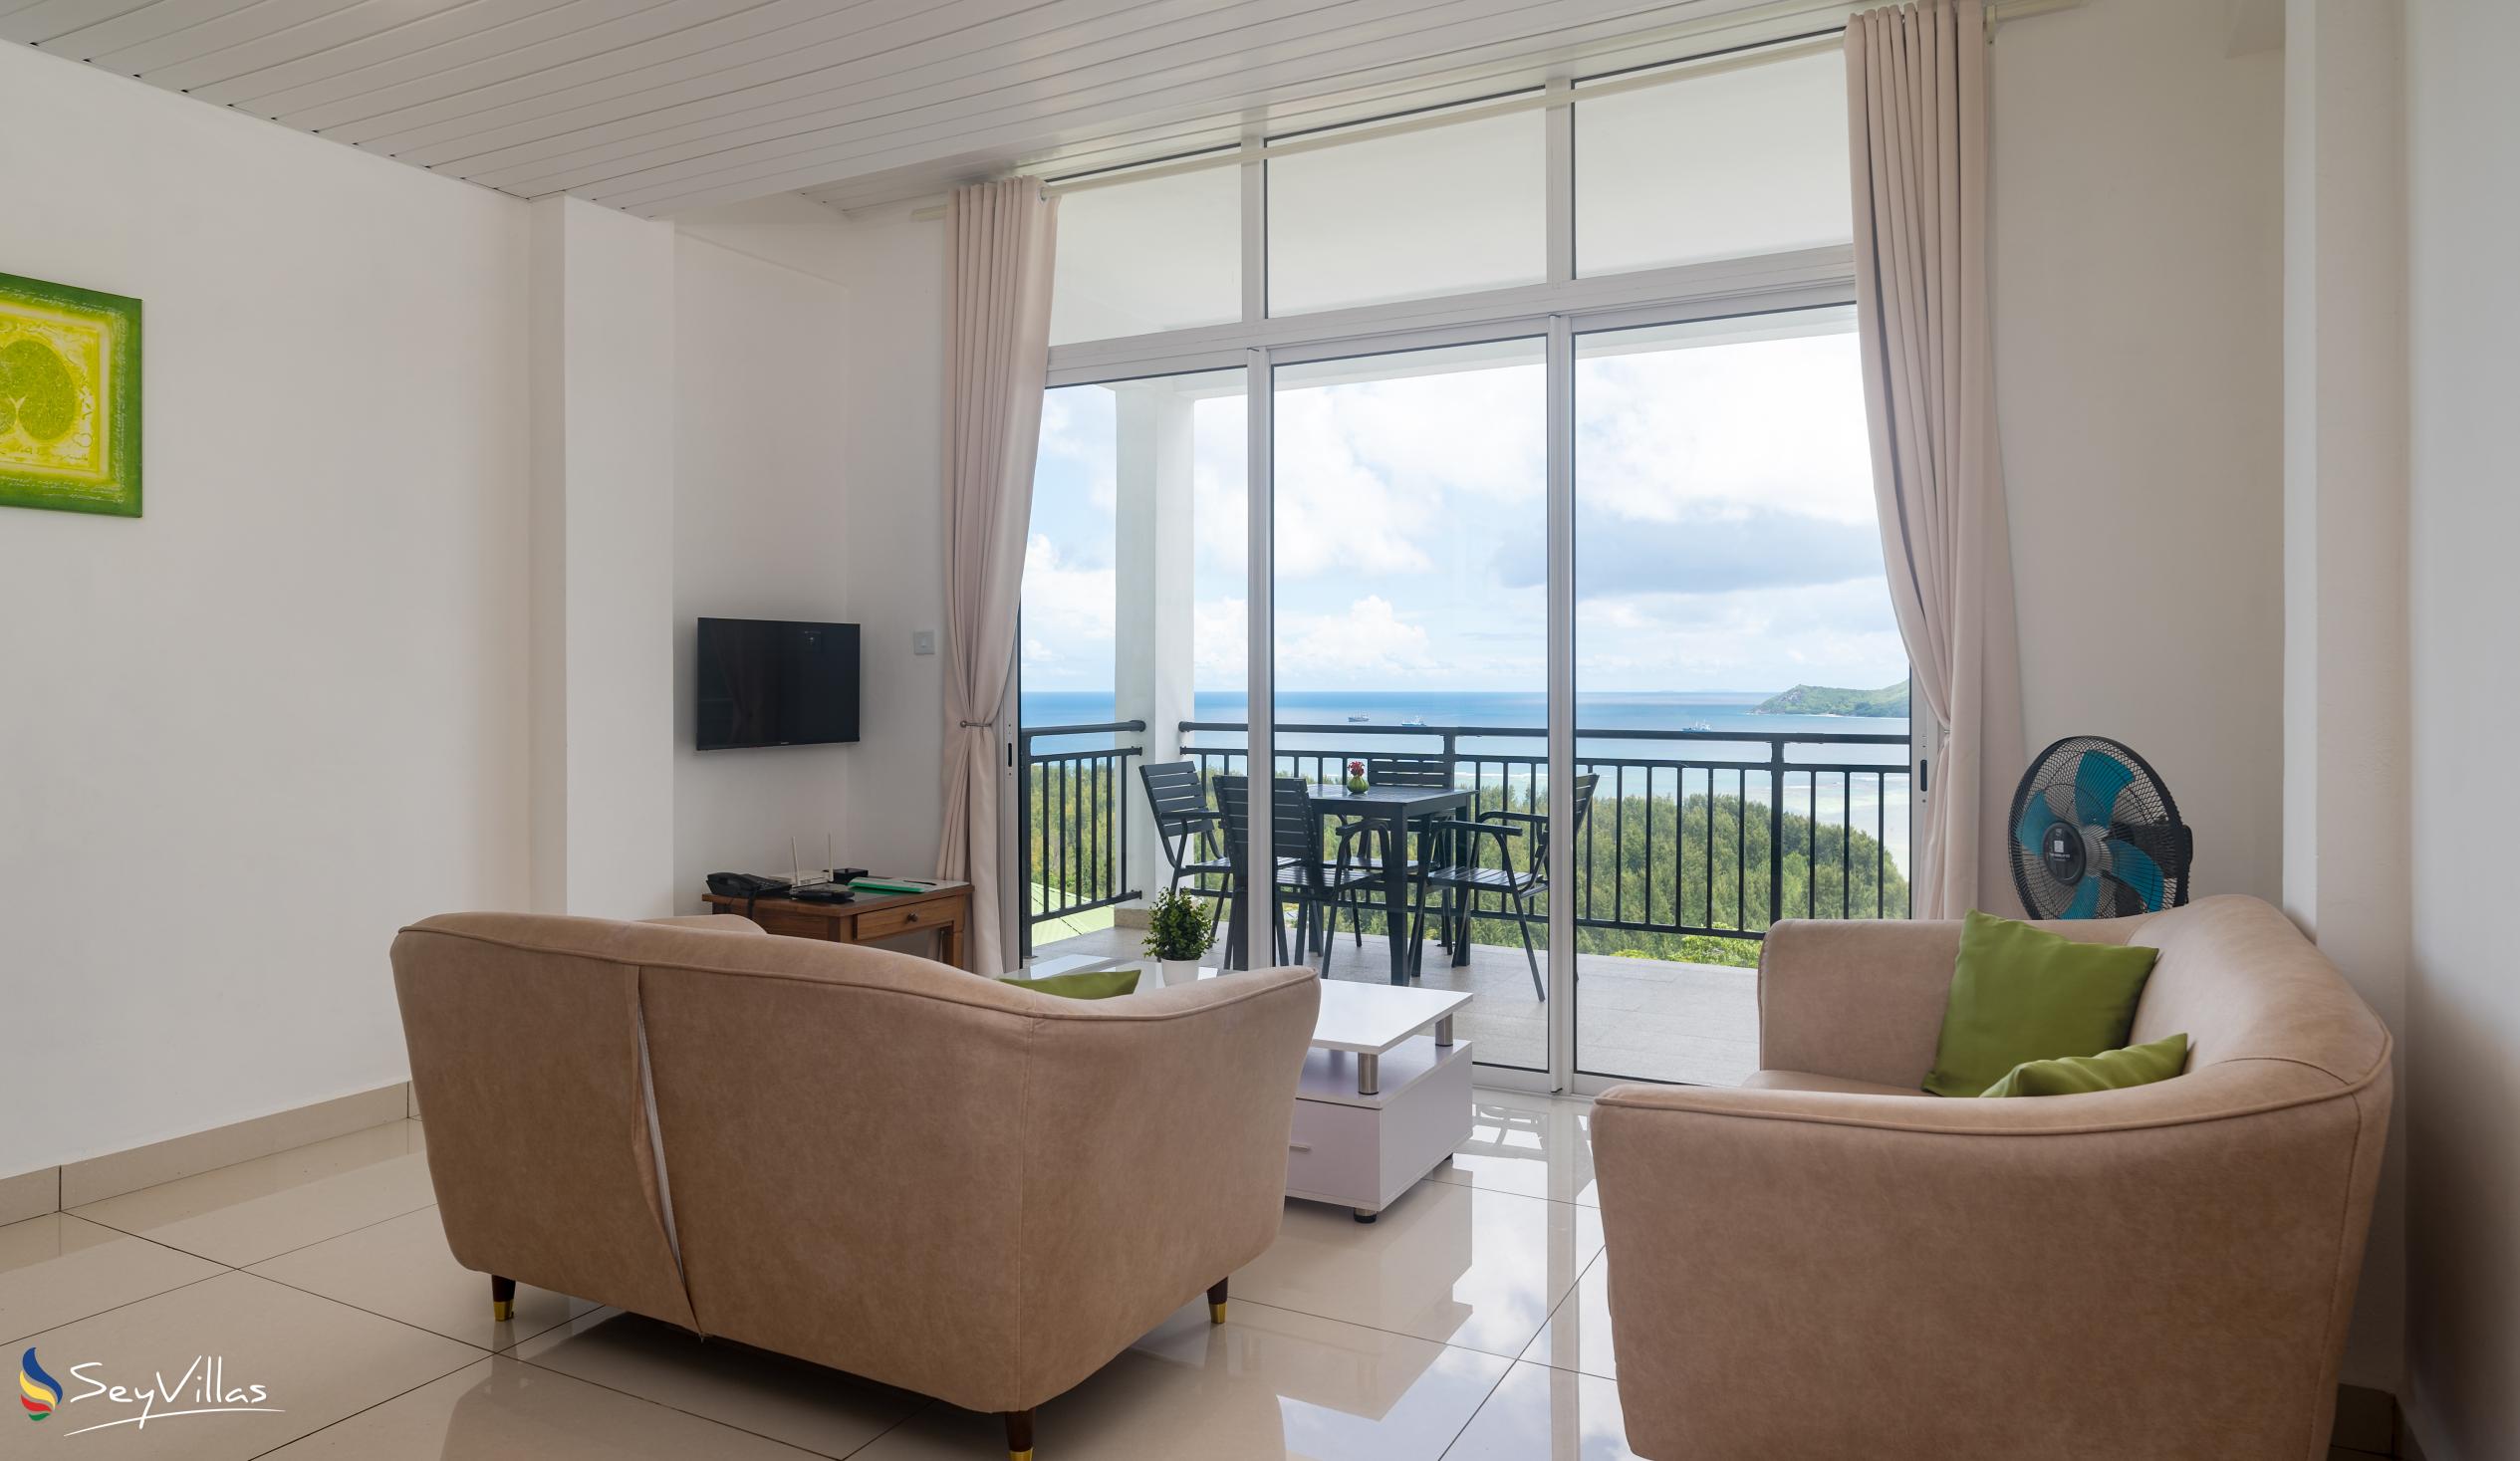 Photo 74: Creole Pearl Self Catering - 2-Bedroom Apartment - Mahé (Seychelles)